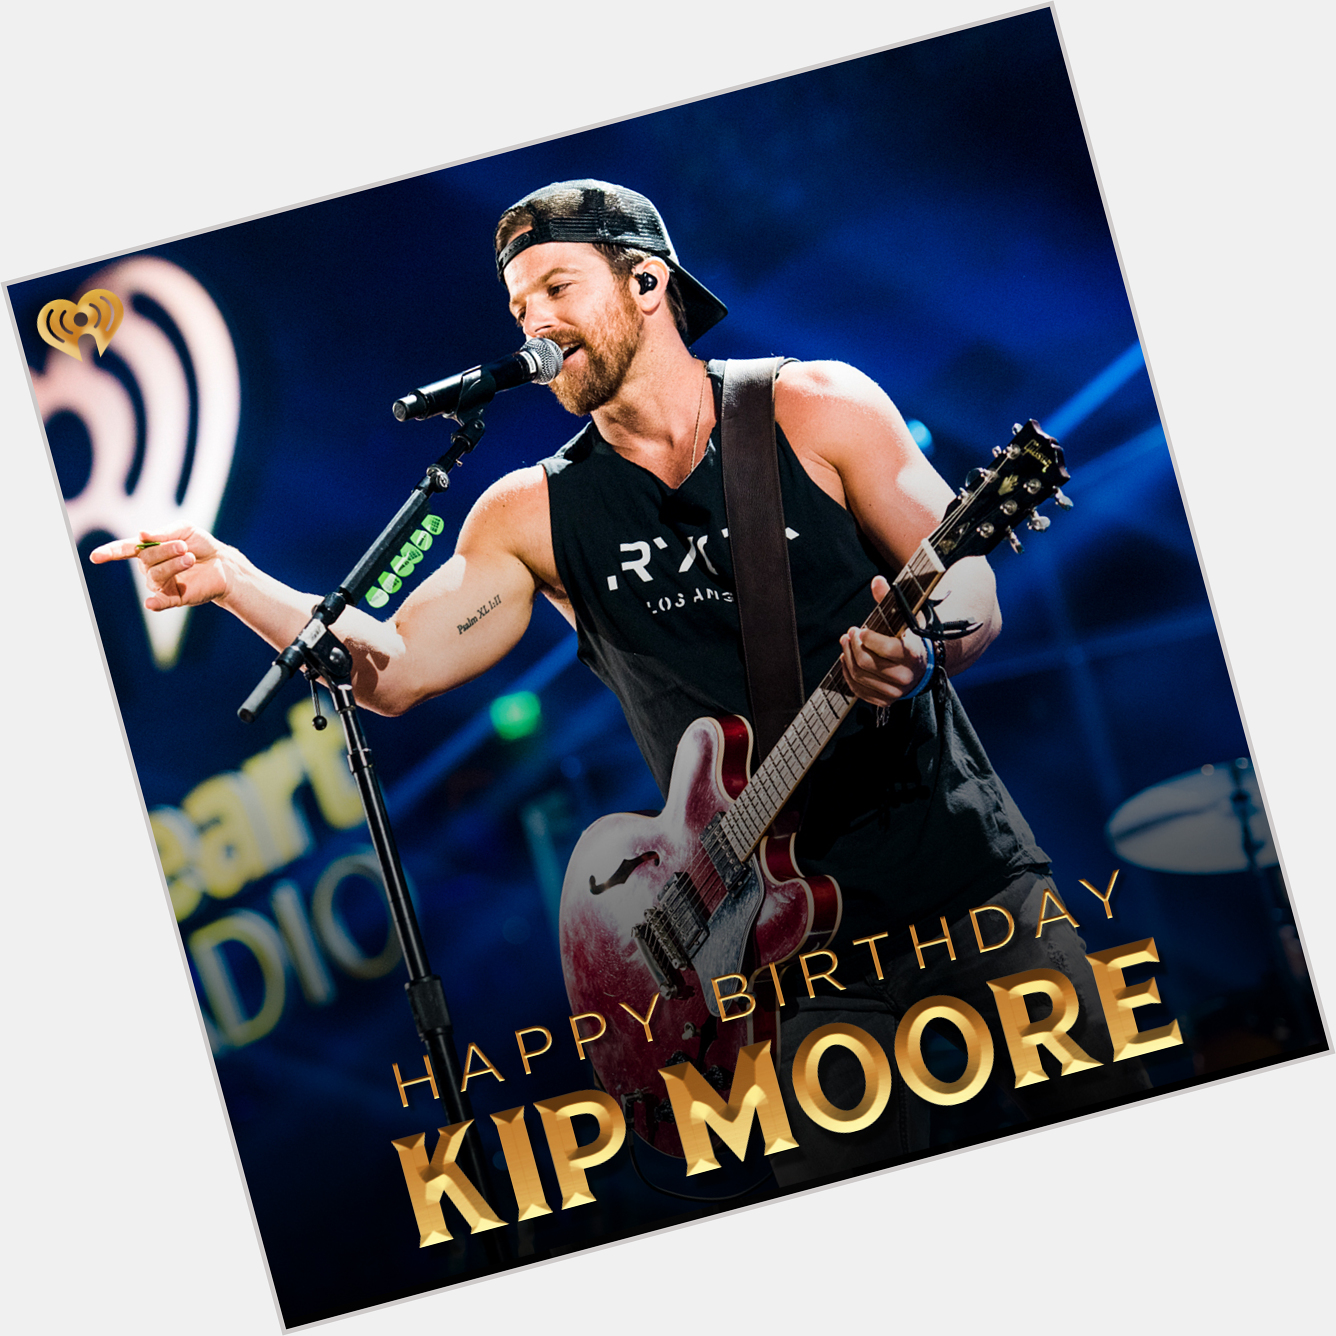 Happy Birthday to our good friend,  Which Kip Moore song are you listening to today? 